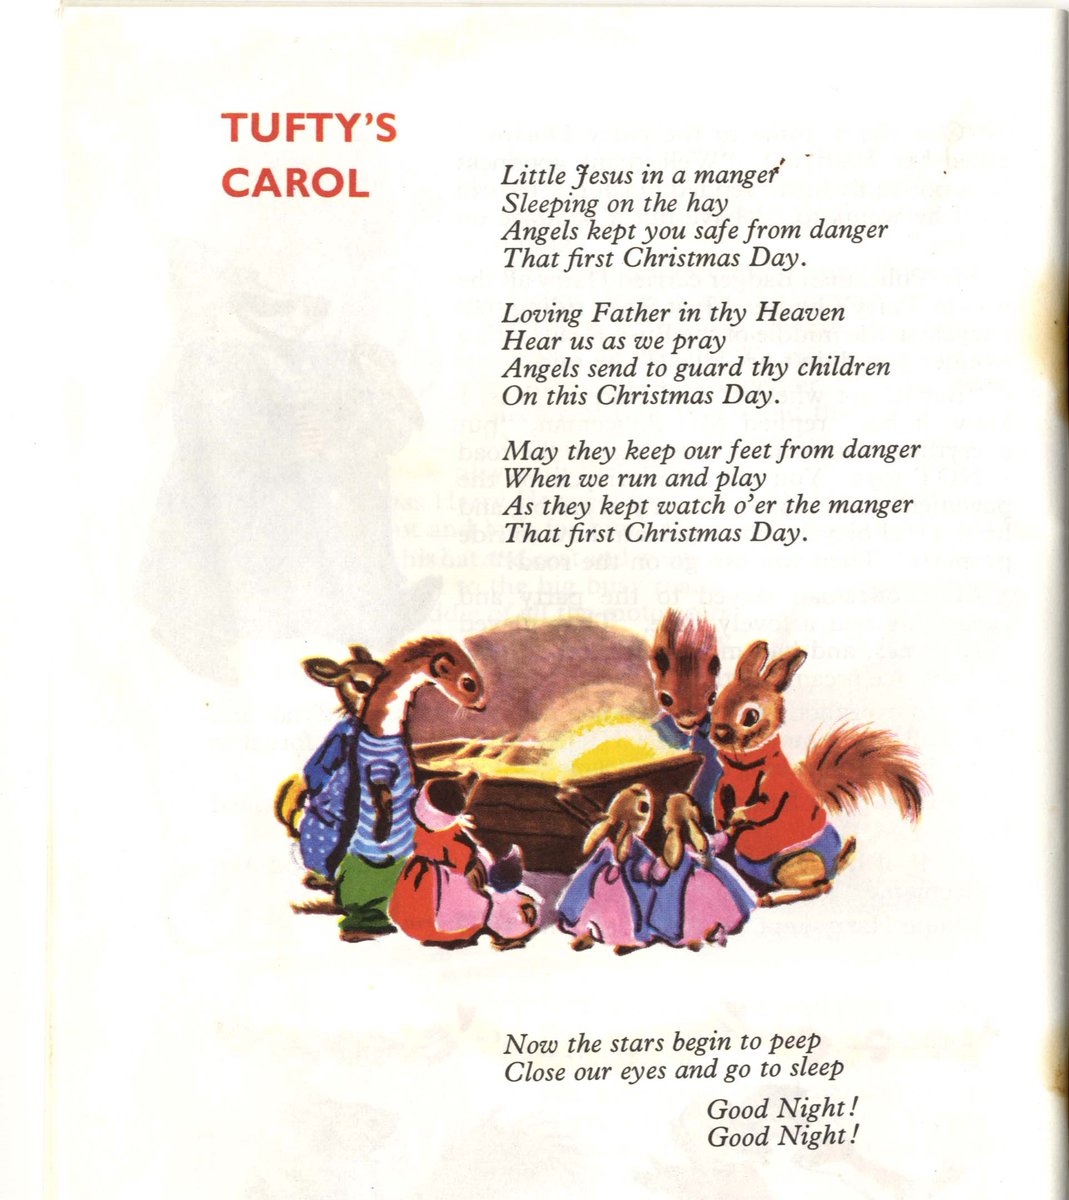 For #CarolSingers who are fans of the Tufty Club, here's a carol on day 12 of the #ArchiveAdventCalendar 🎶

Accession 23/017.